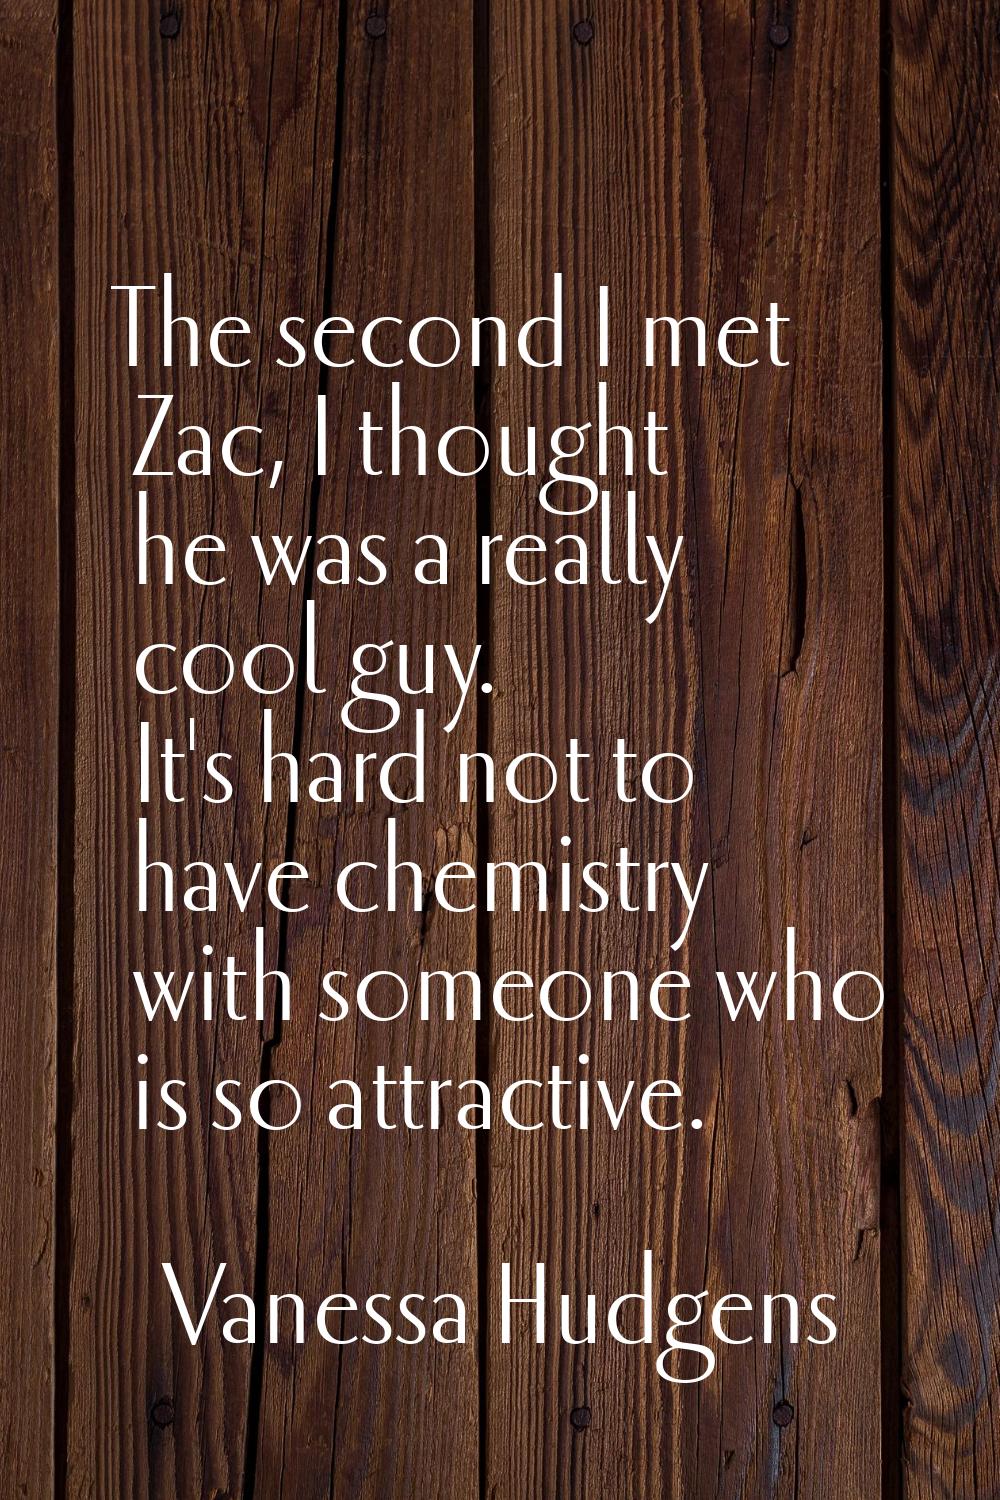 The second I met Zac, I thought he was a really cool guy. It's hard not to have chemistry with some